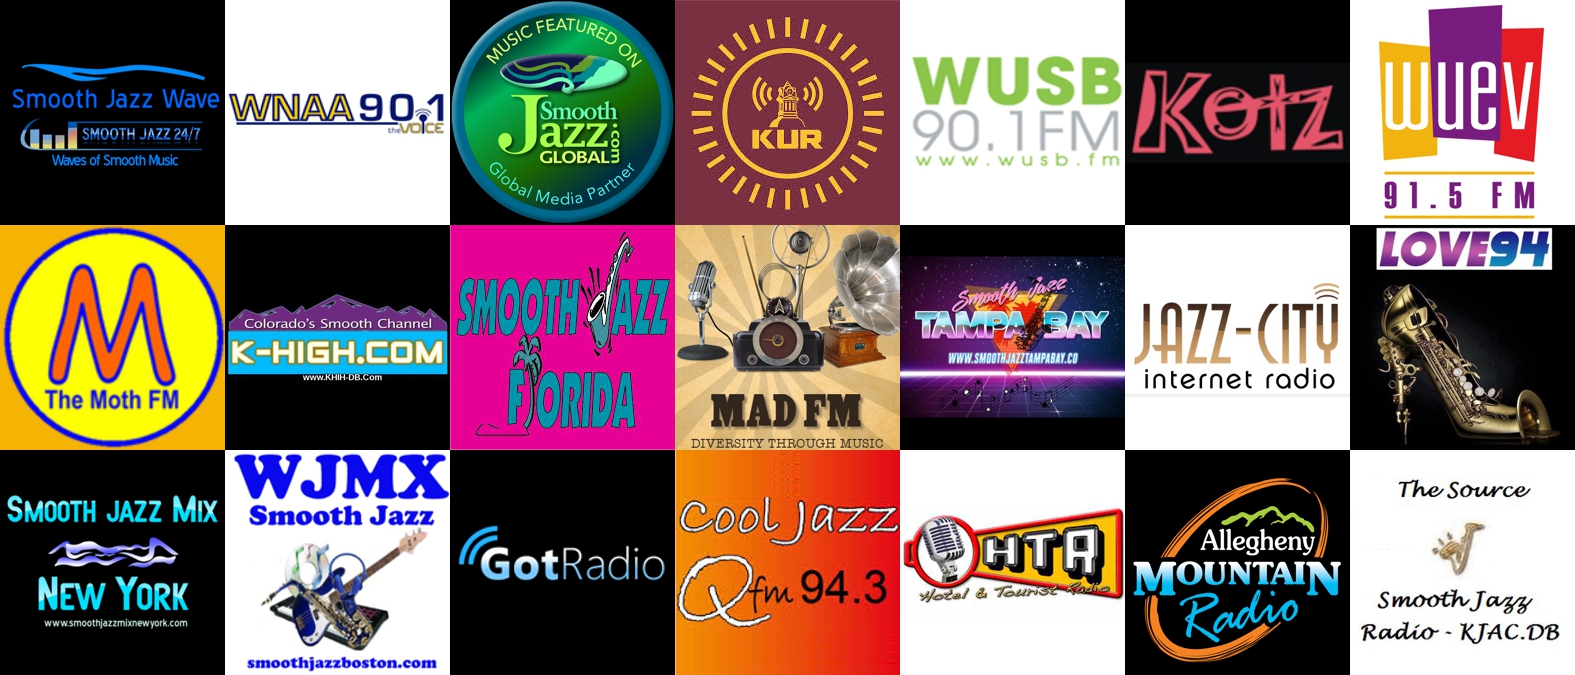 510JAZZ was heard on 21 radio stations during the week of August 27.